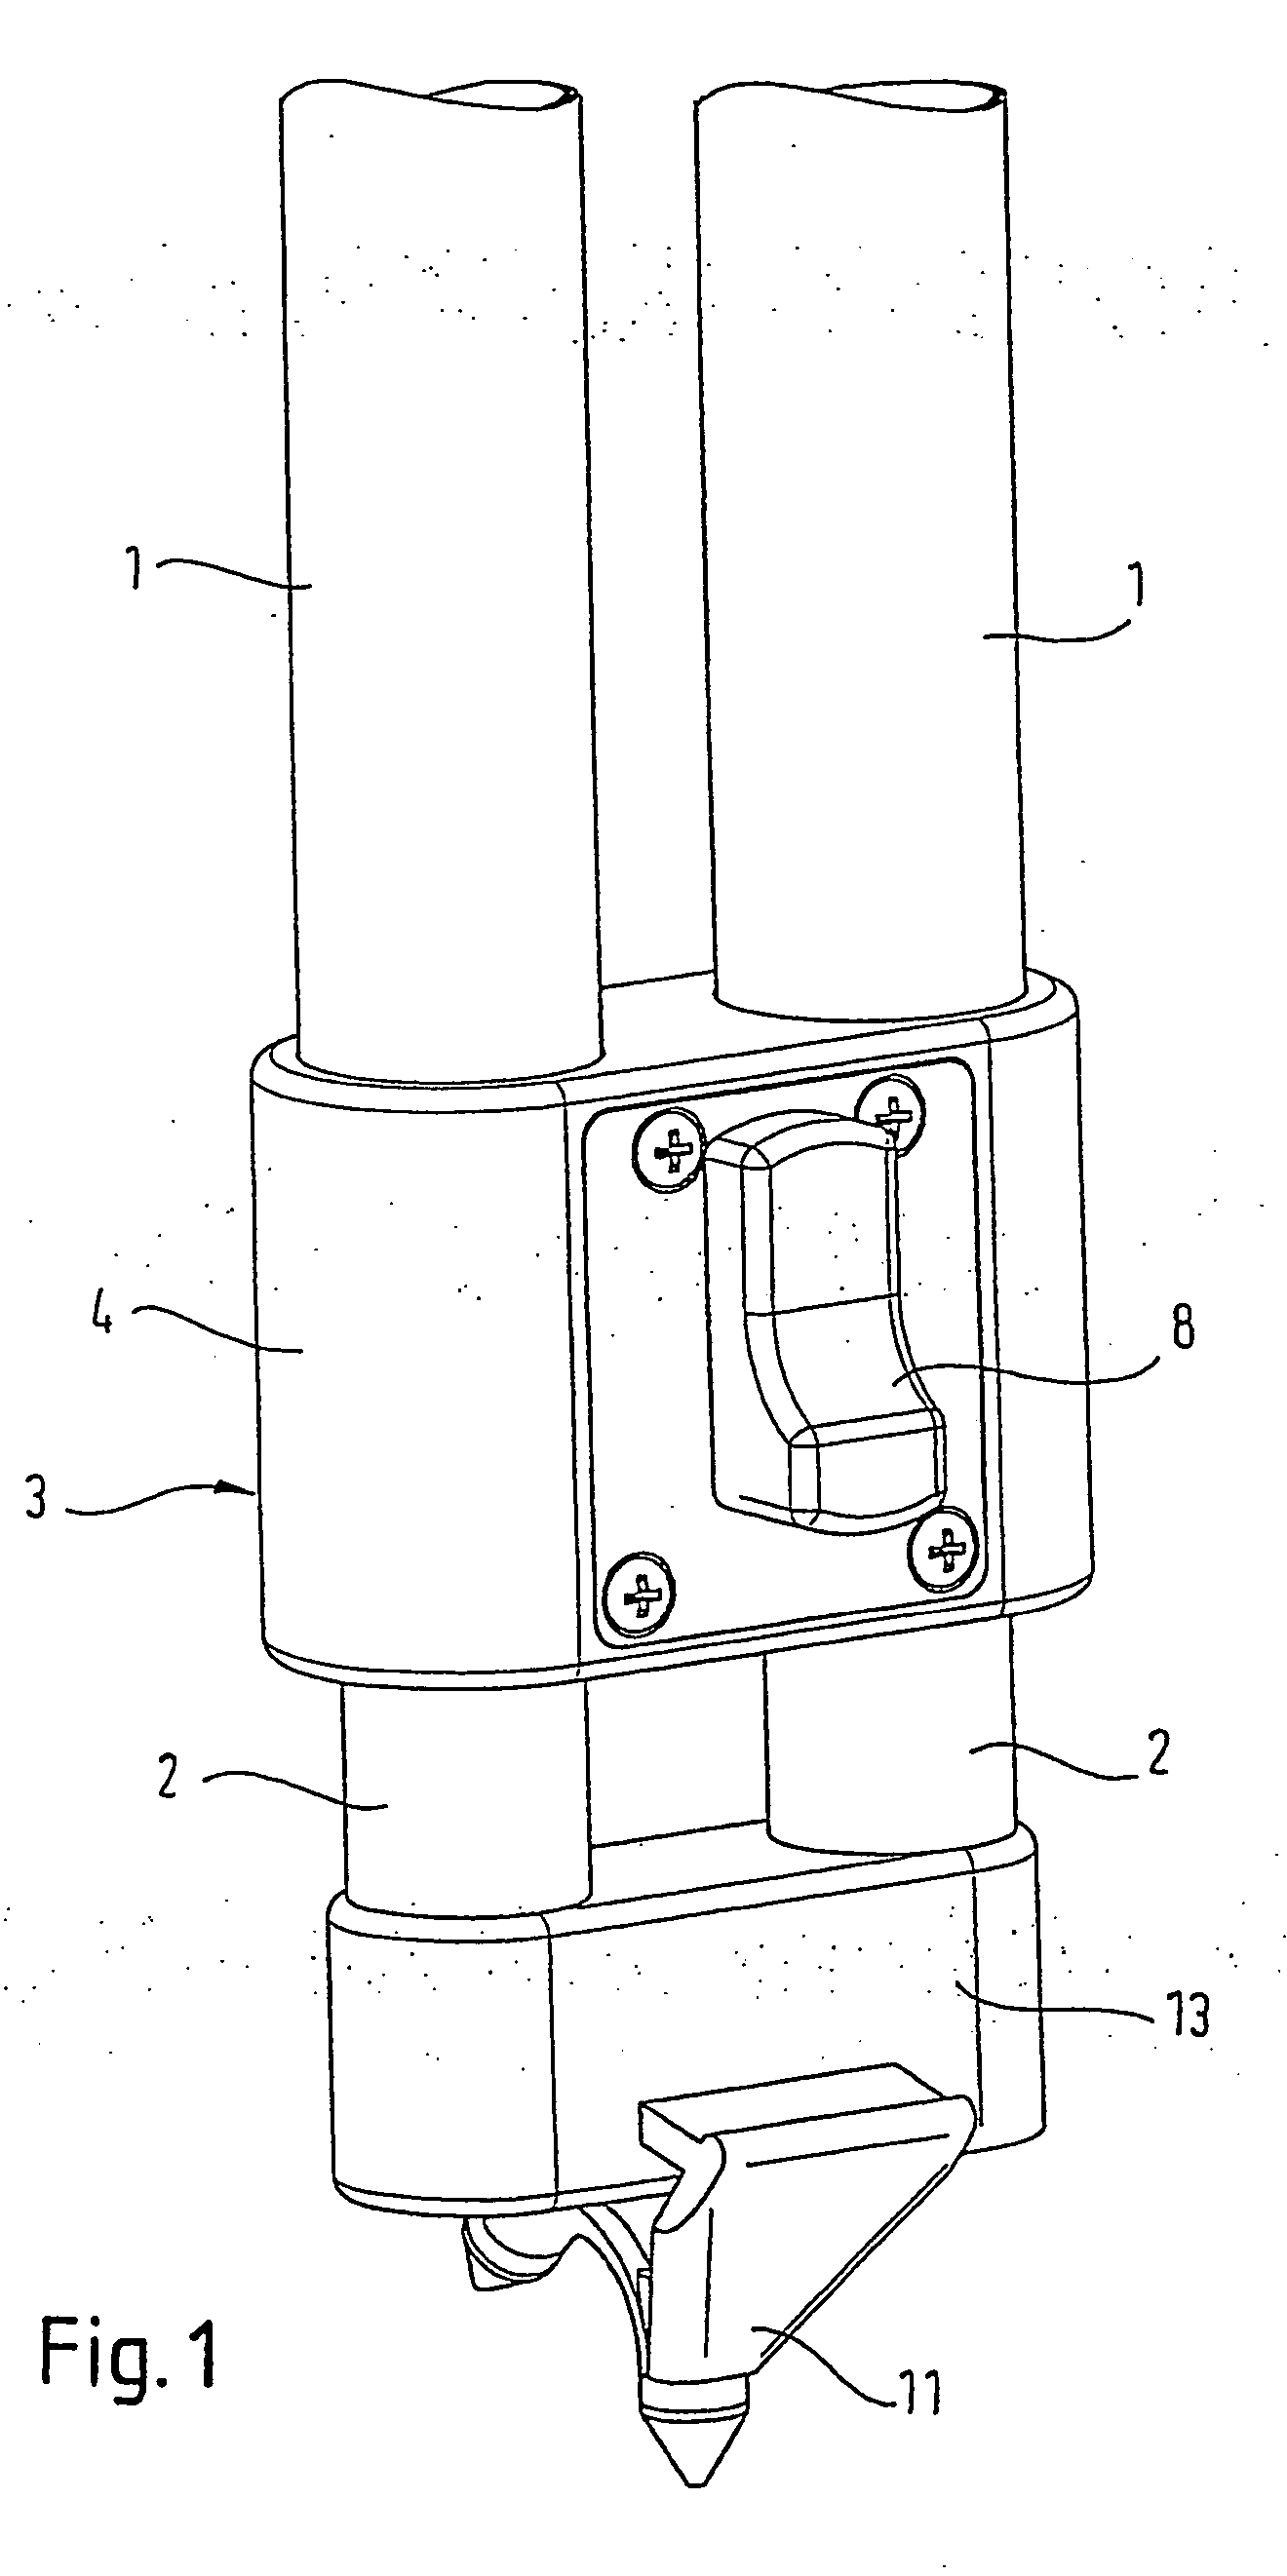 Multiple telescoping tube comprising a load-controlled locking device